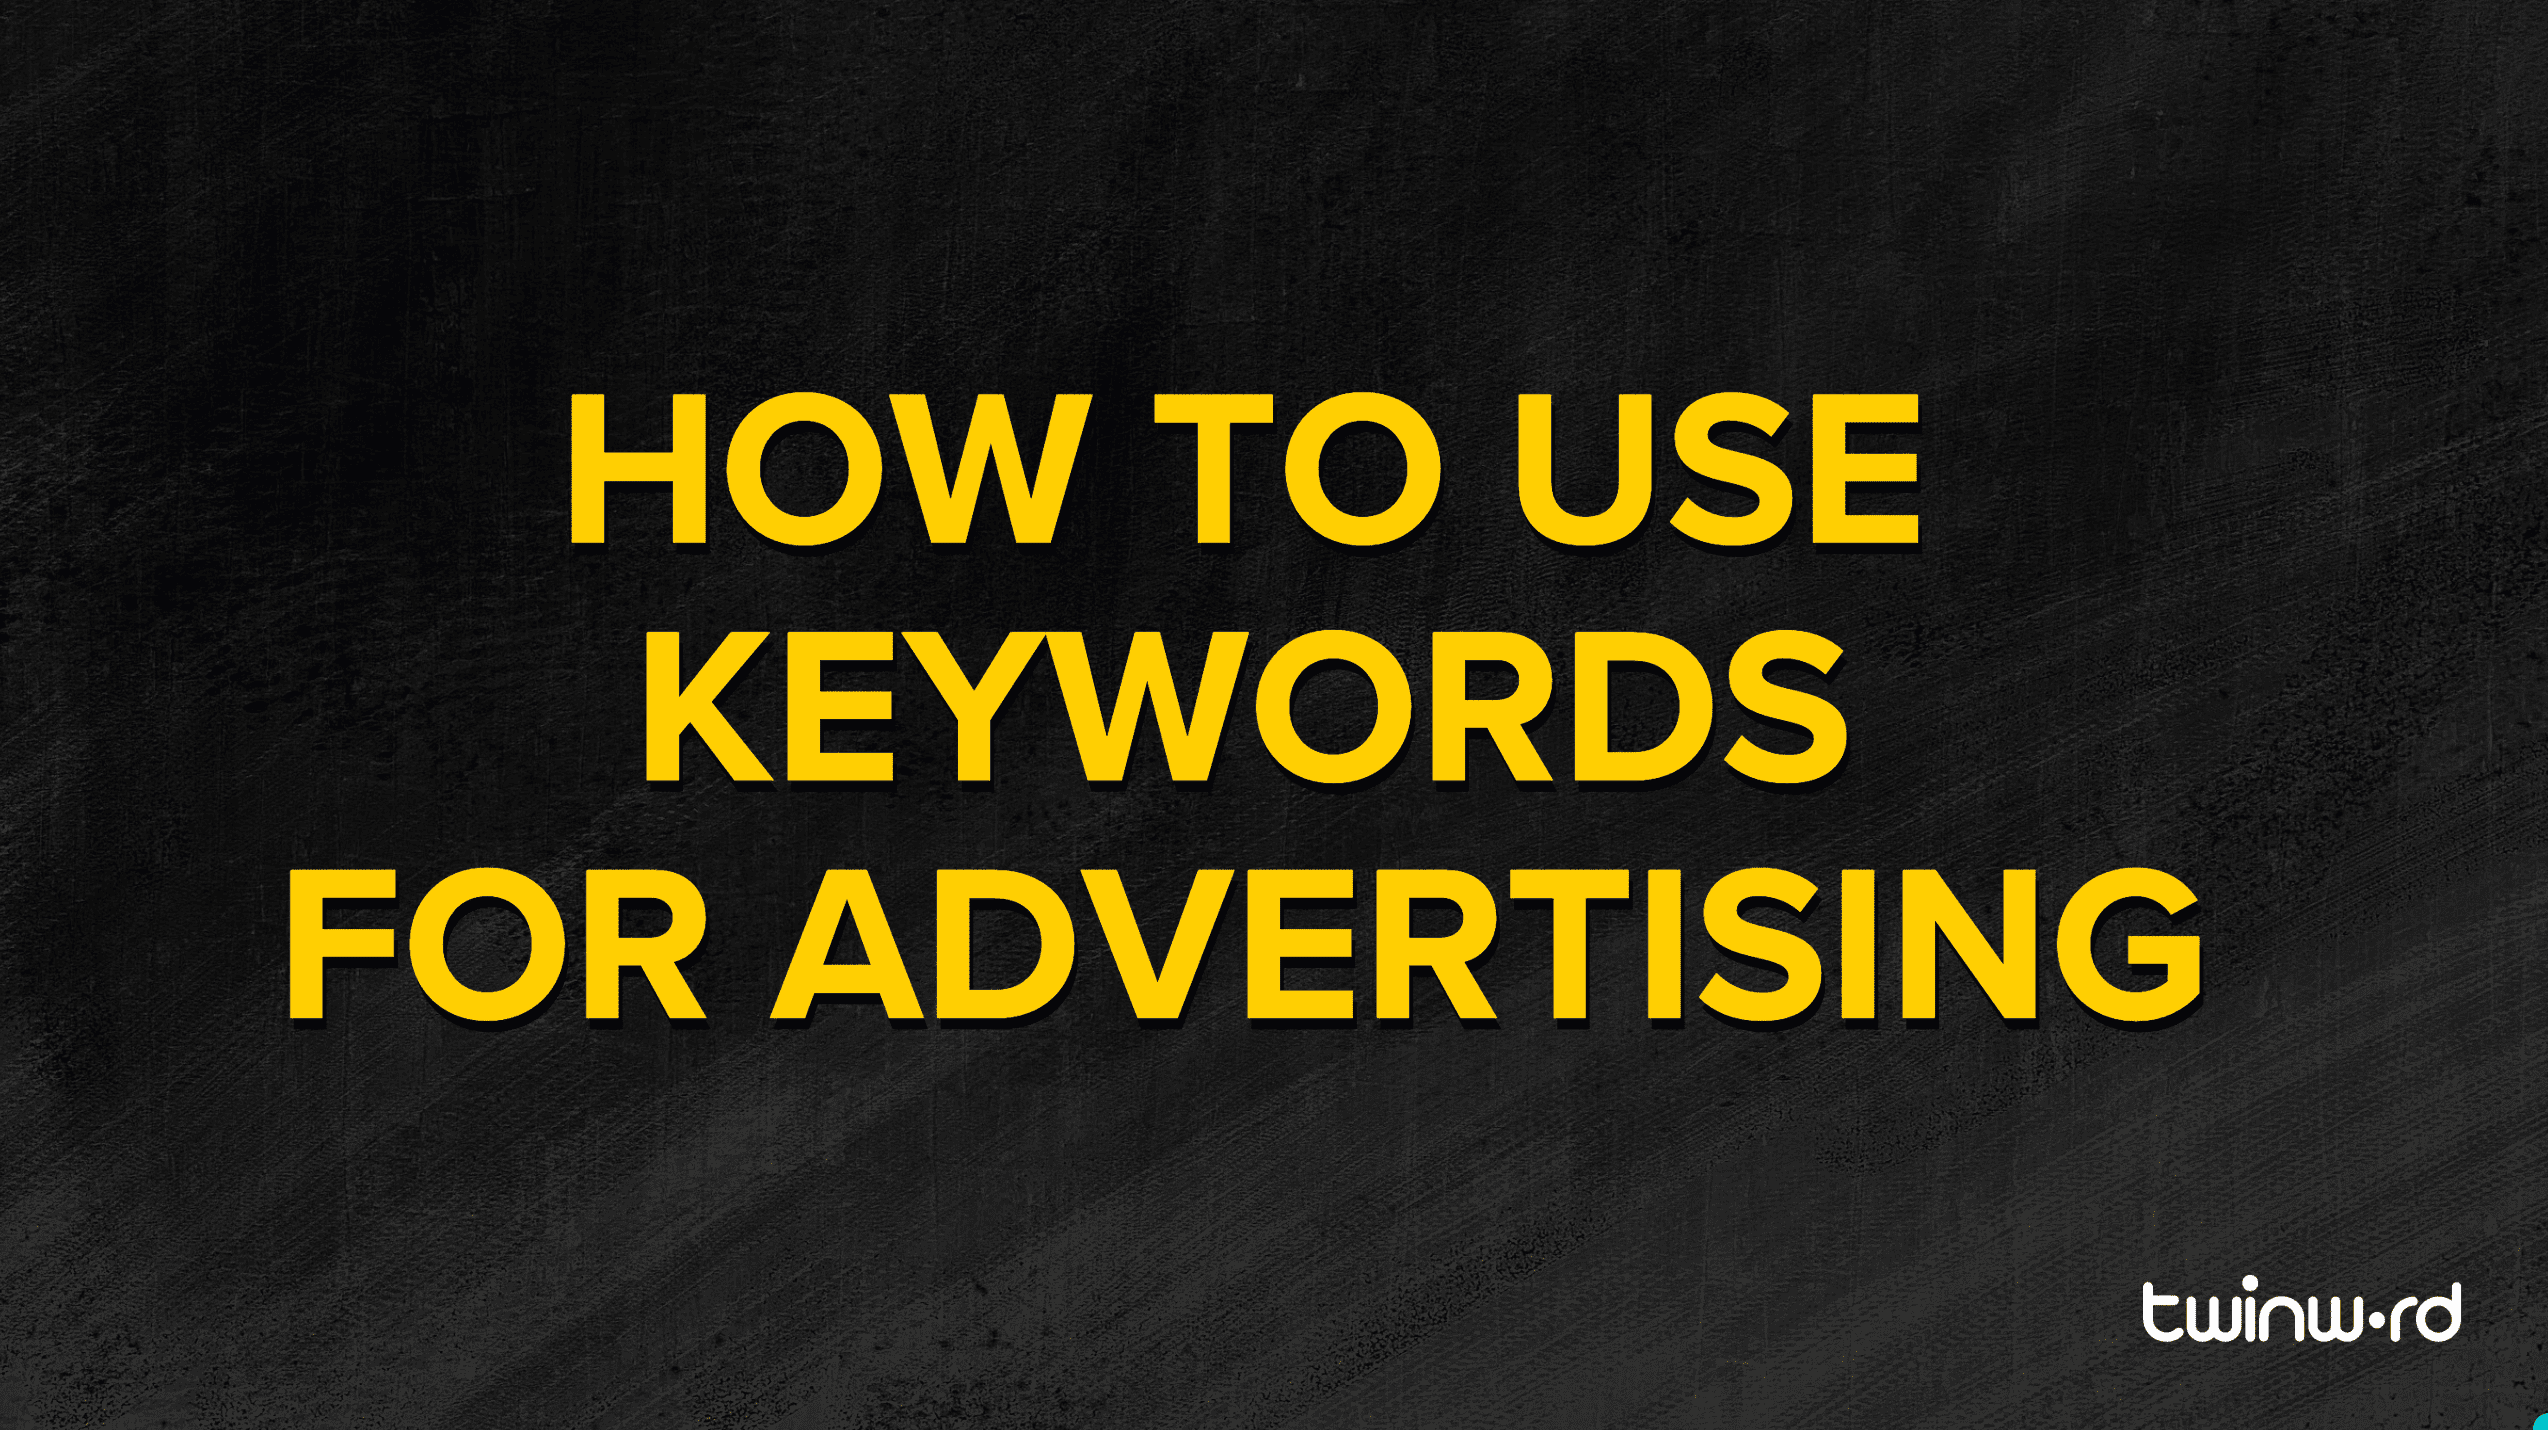 How To Use Keywords For Advertising